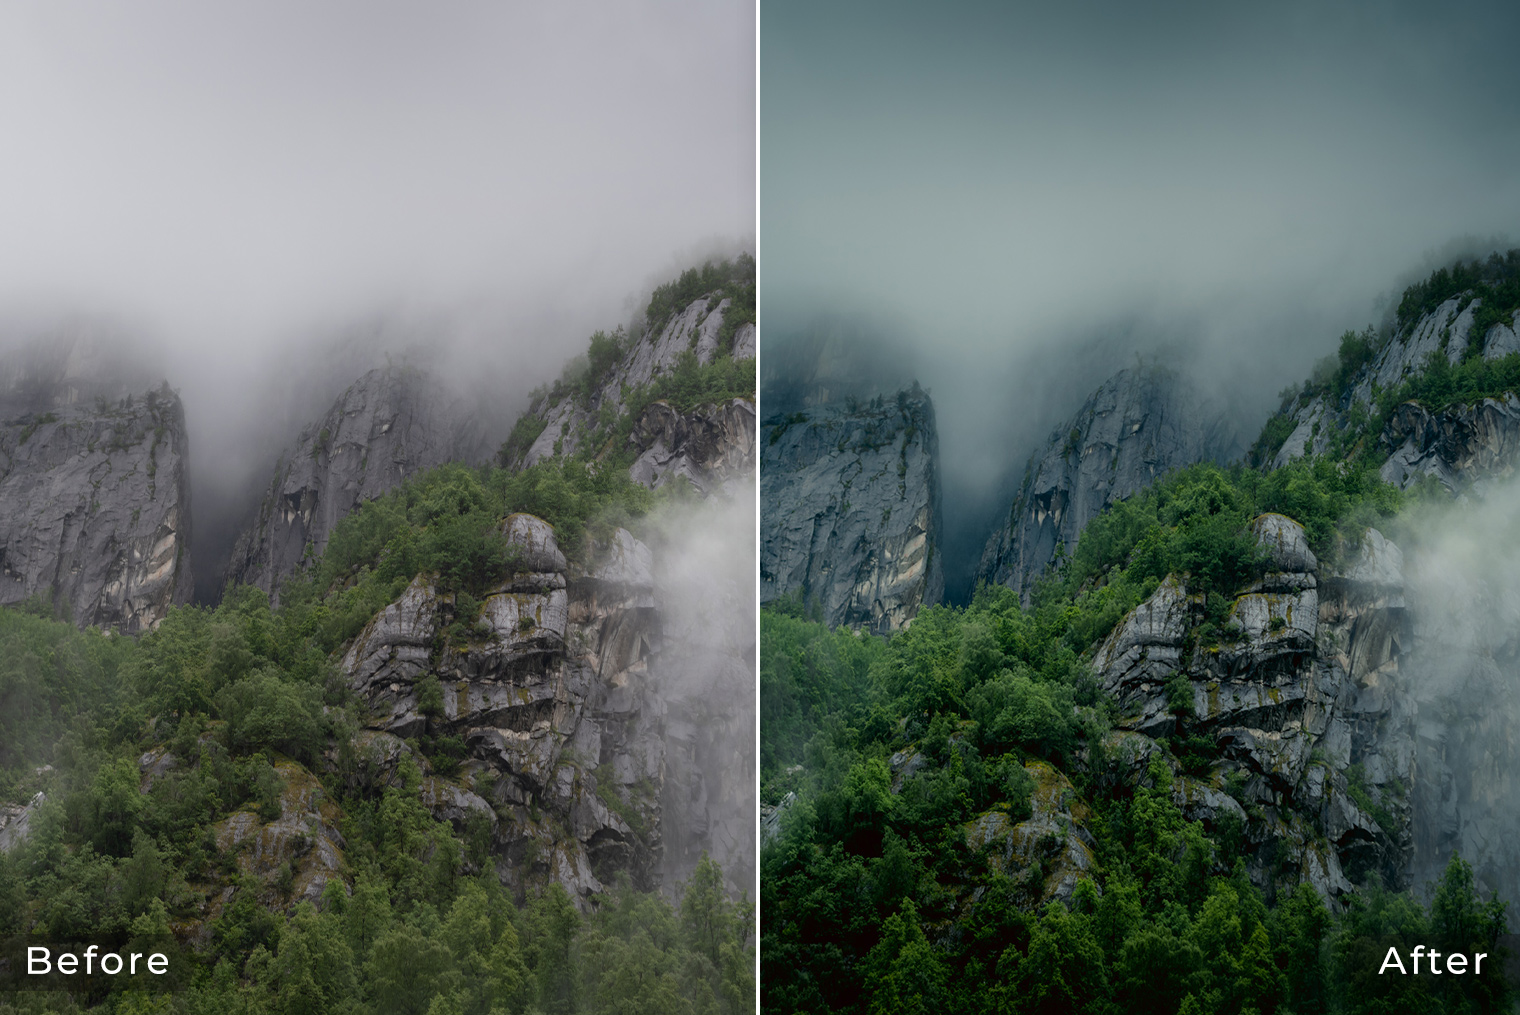 Before & After - Moody Mountain Landscape